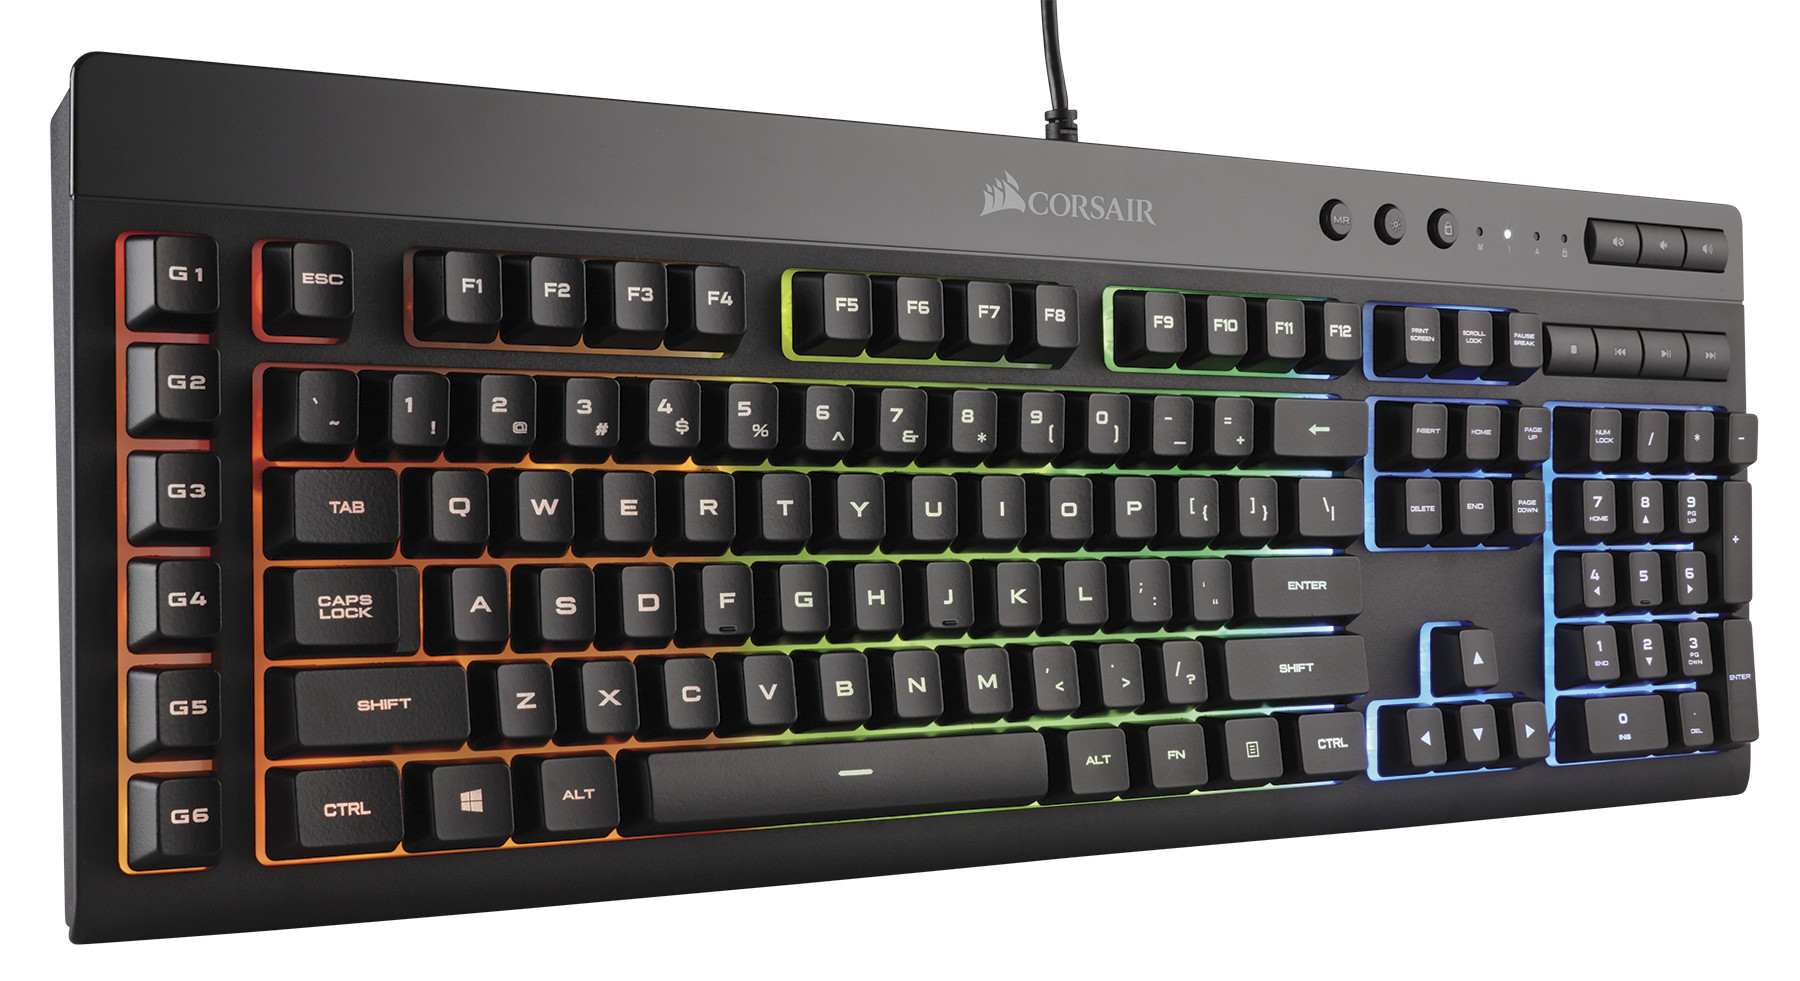 The Corsair K55 RGB Pro Gaming Keyboard is only £40 at